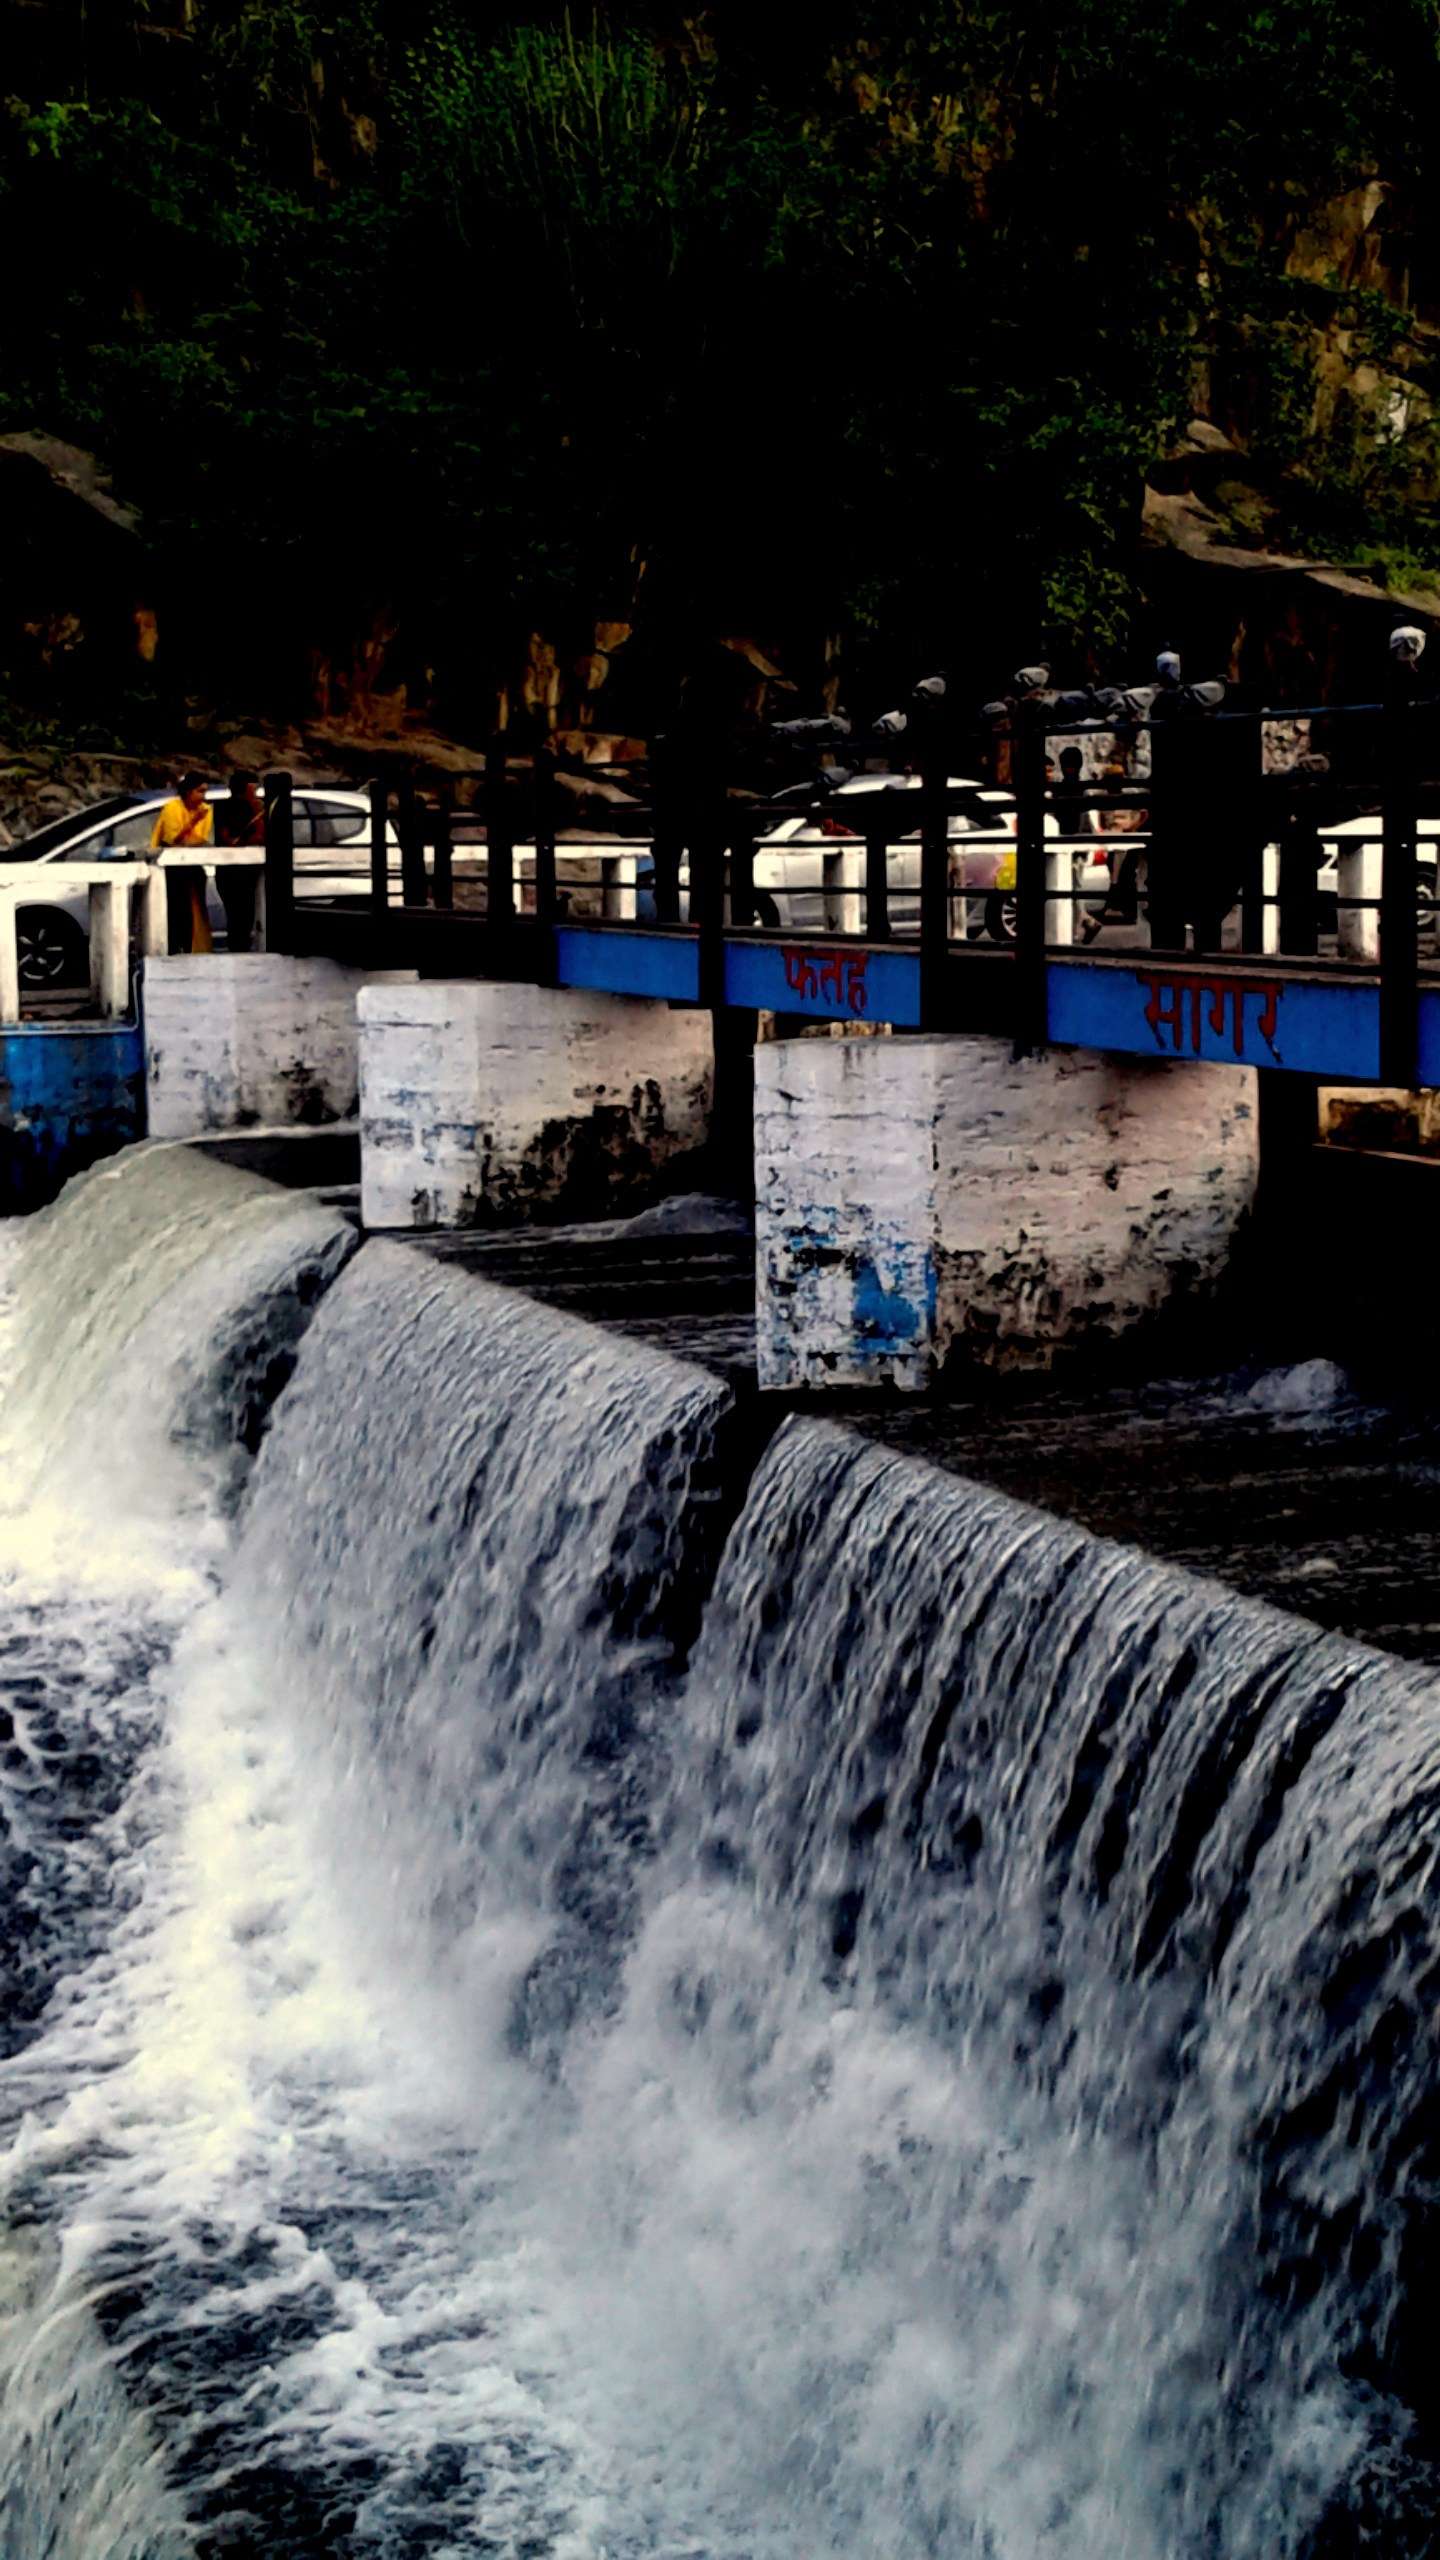 No lights on Fatehsagar overflow-Public disappointed